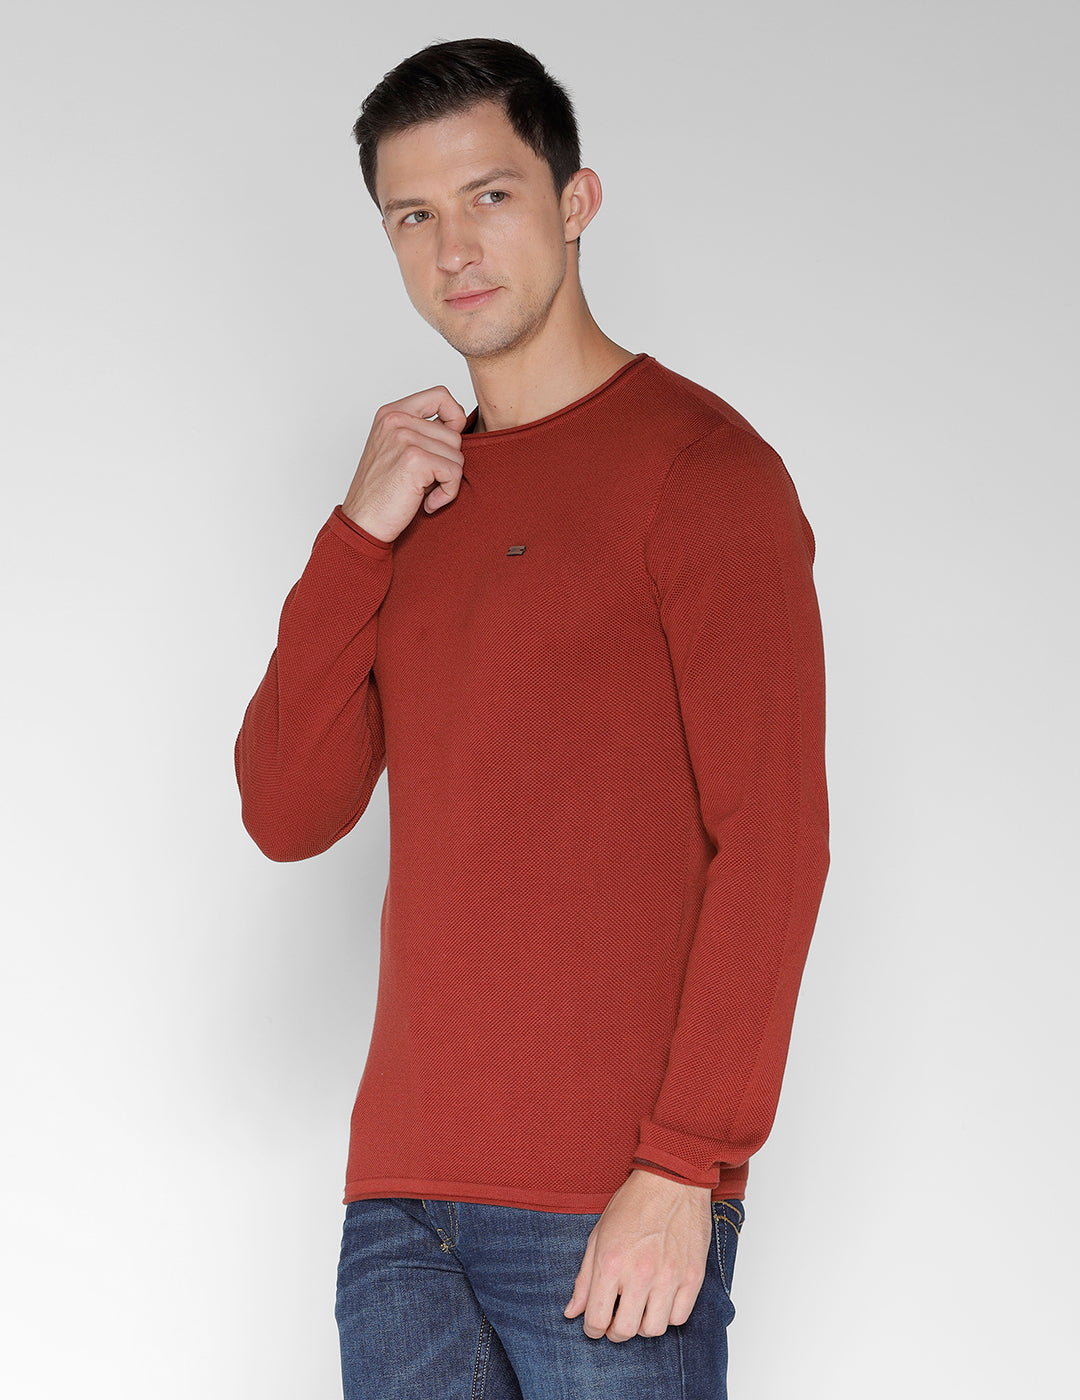 Identiti Full Sleeve Solid Slim Fit Cotton Casual Round Neck T-Shirt For Men